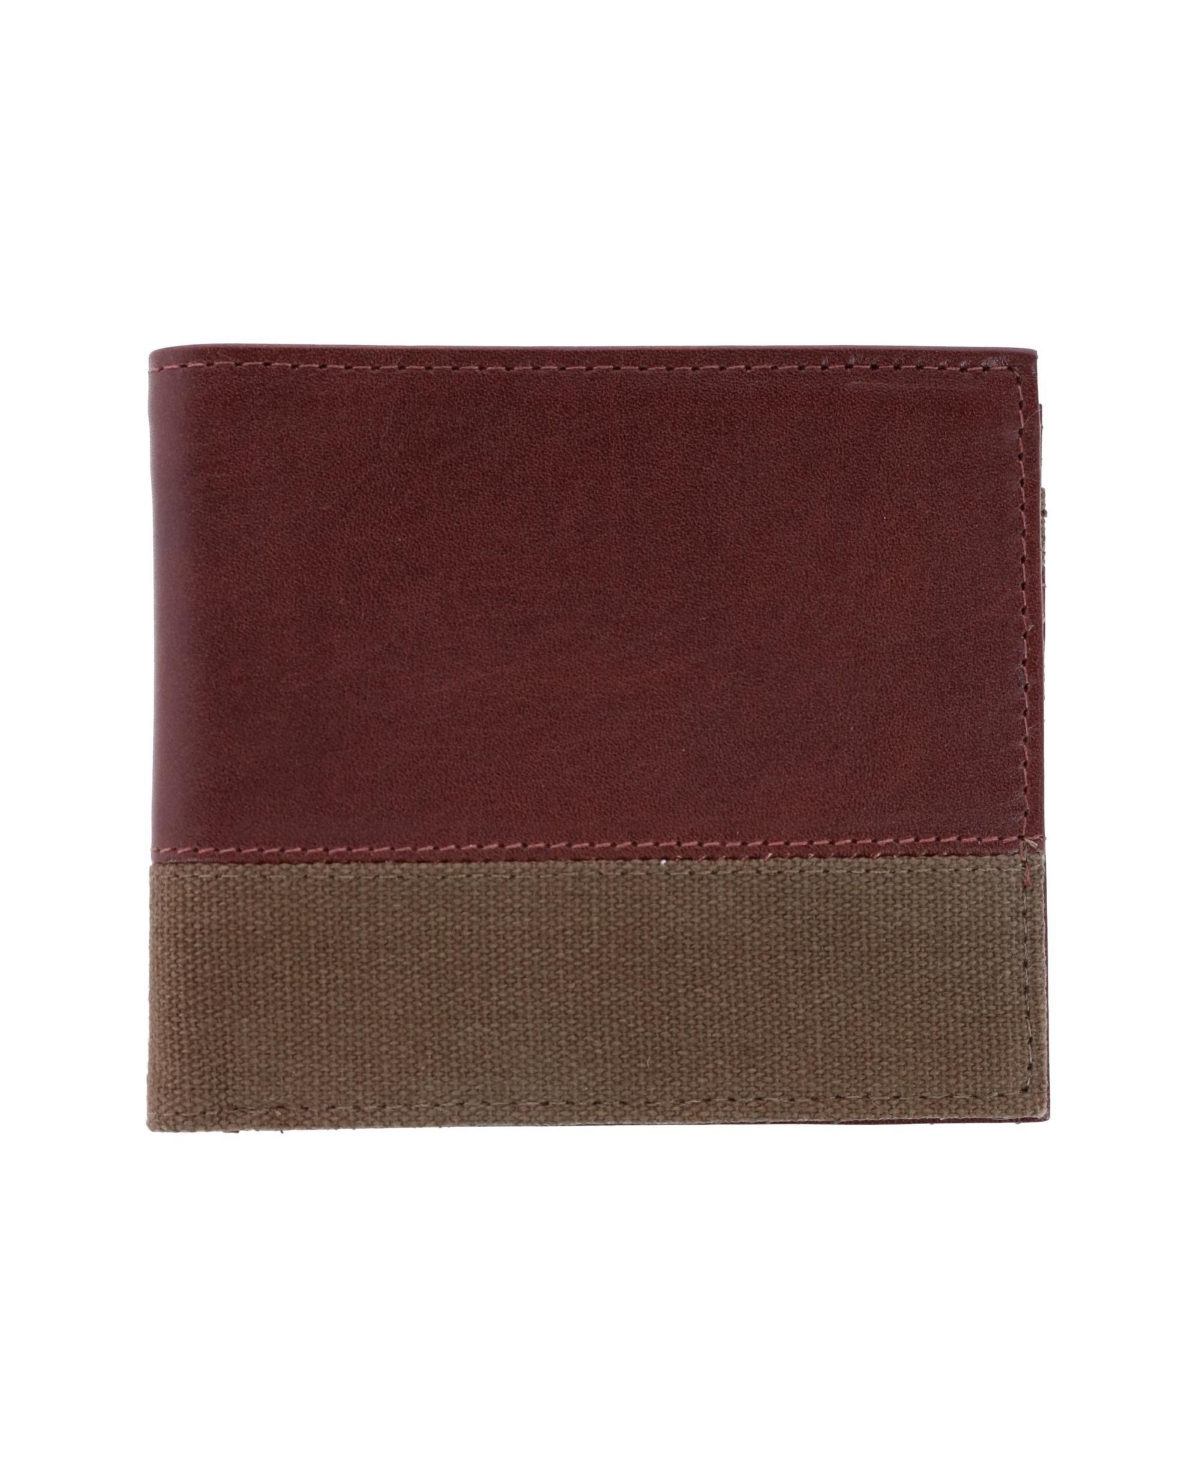 Men's Charing Cross Rfid Leather & Canvas Bi-Fold Wallet - Brown leather with olive green